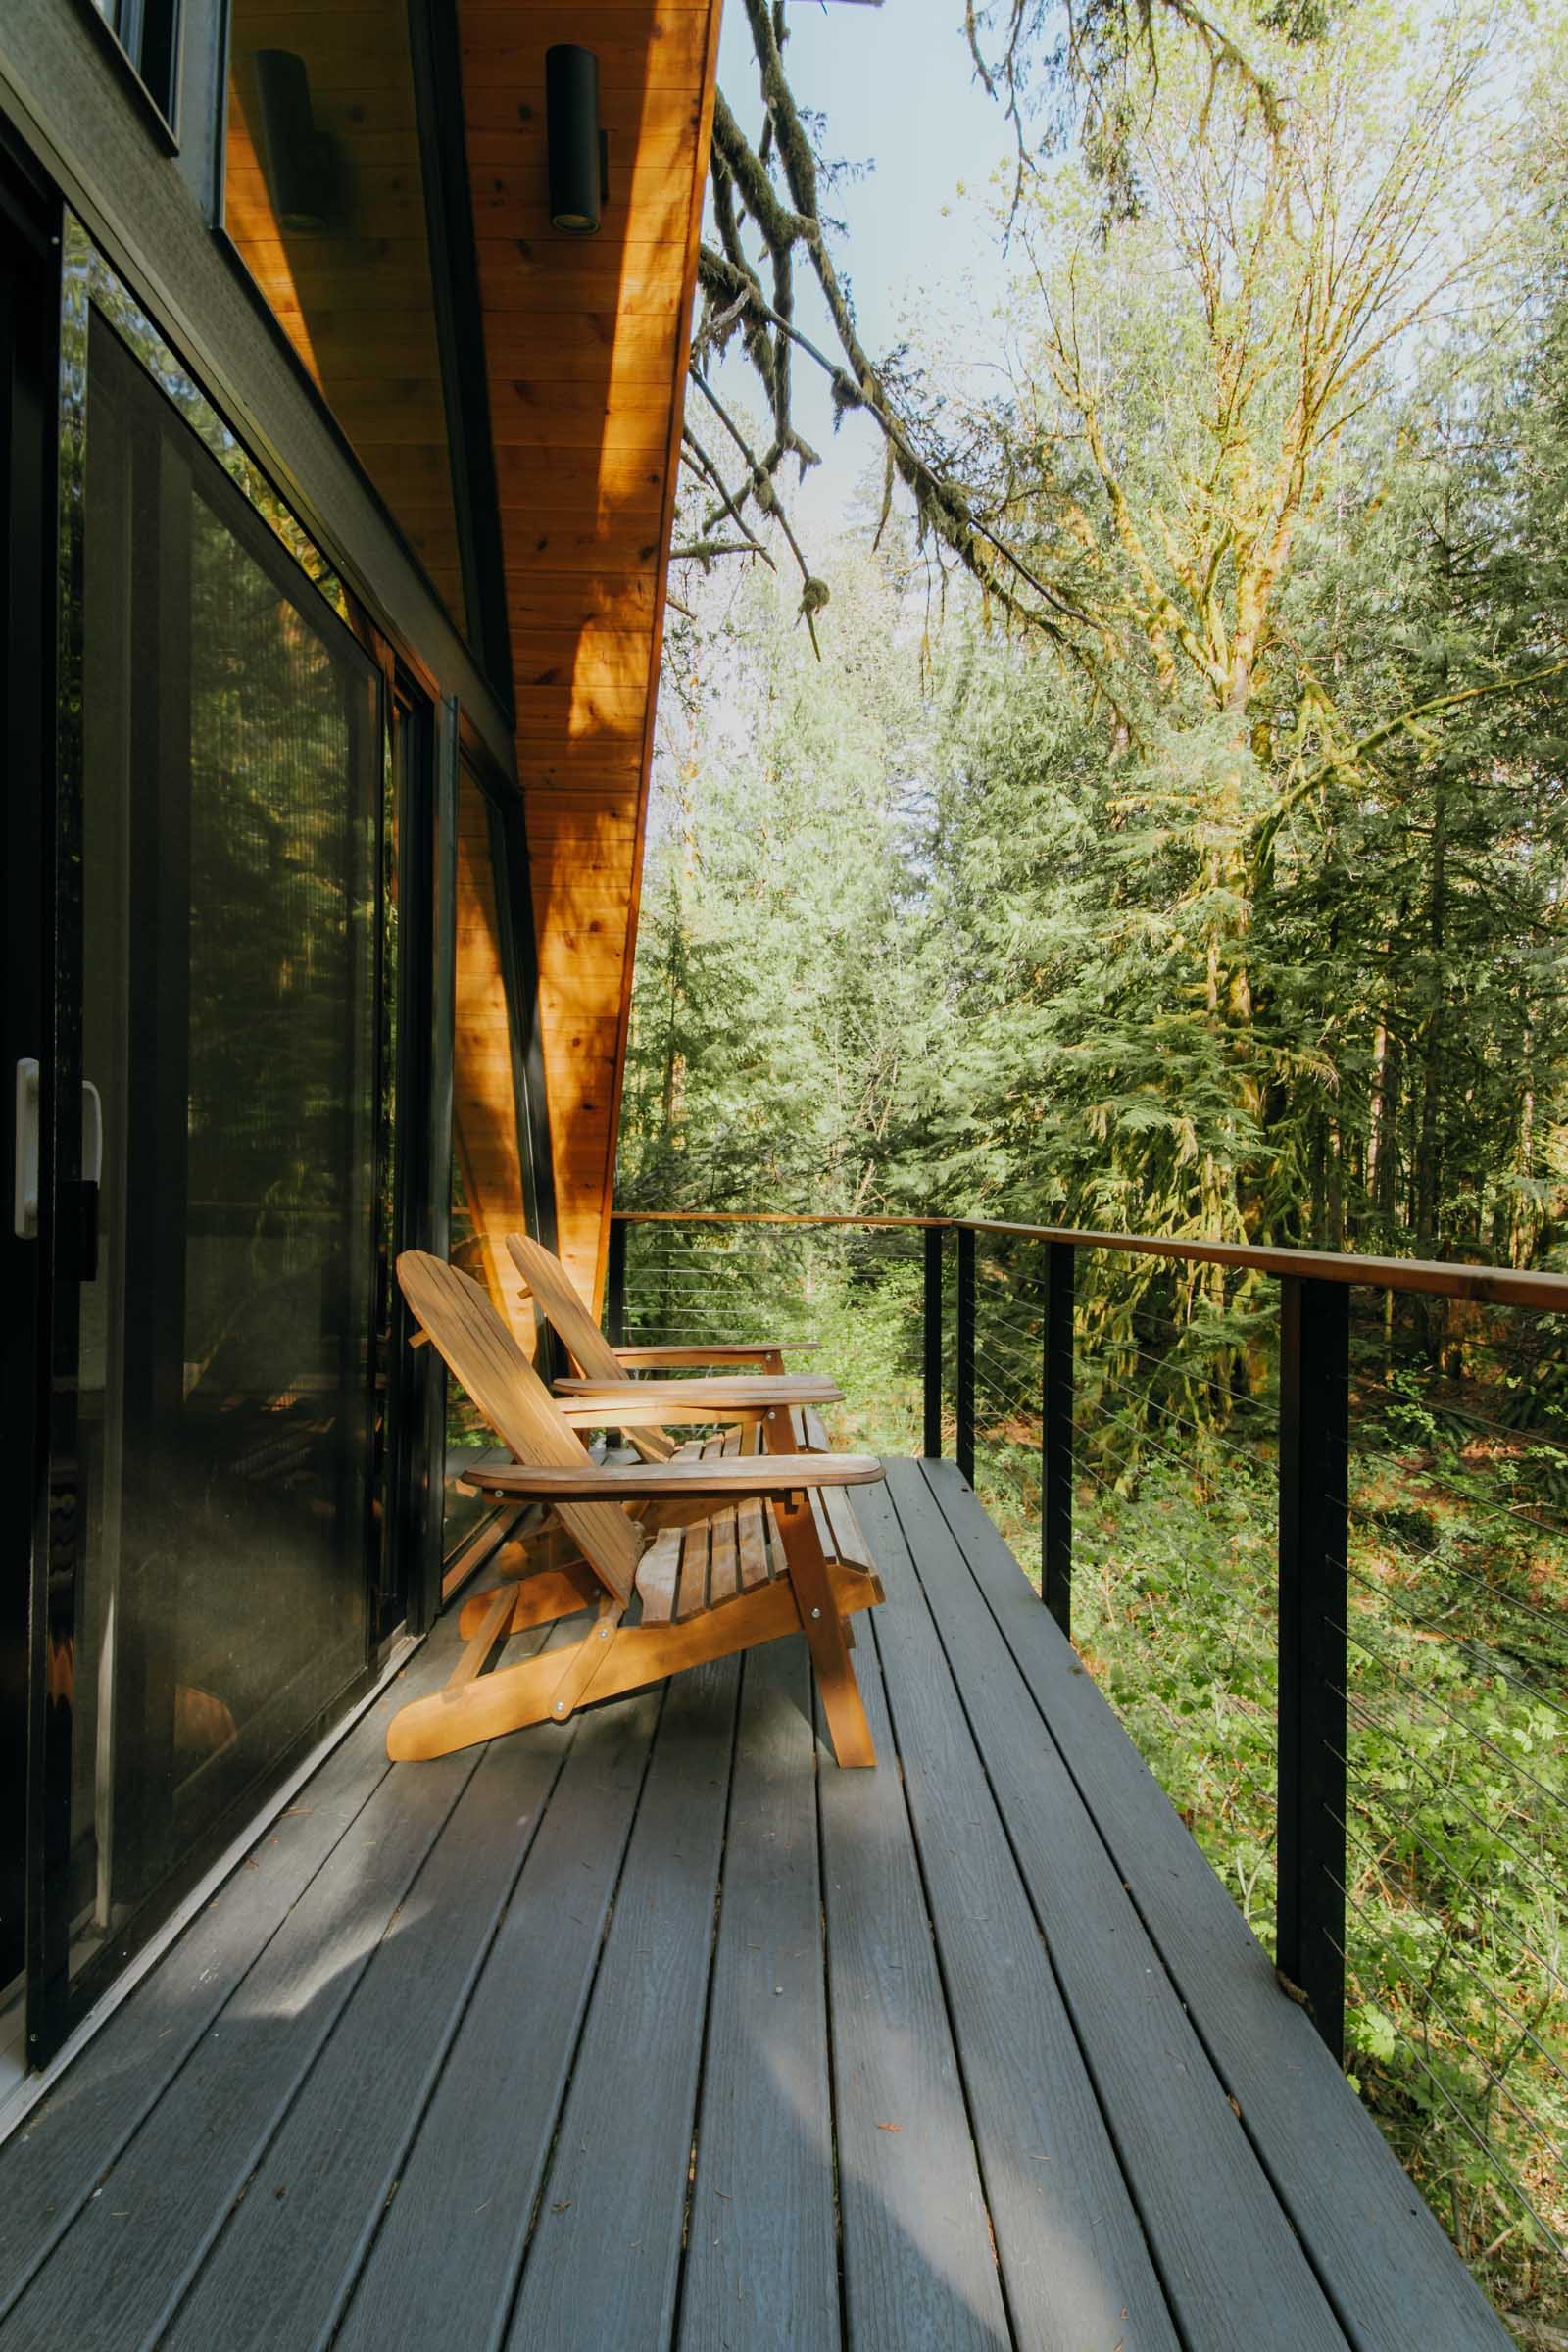 The Treeframe Cabin's Deck